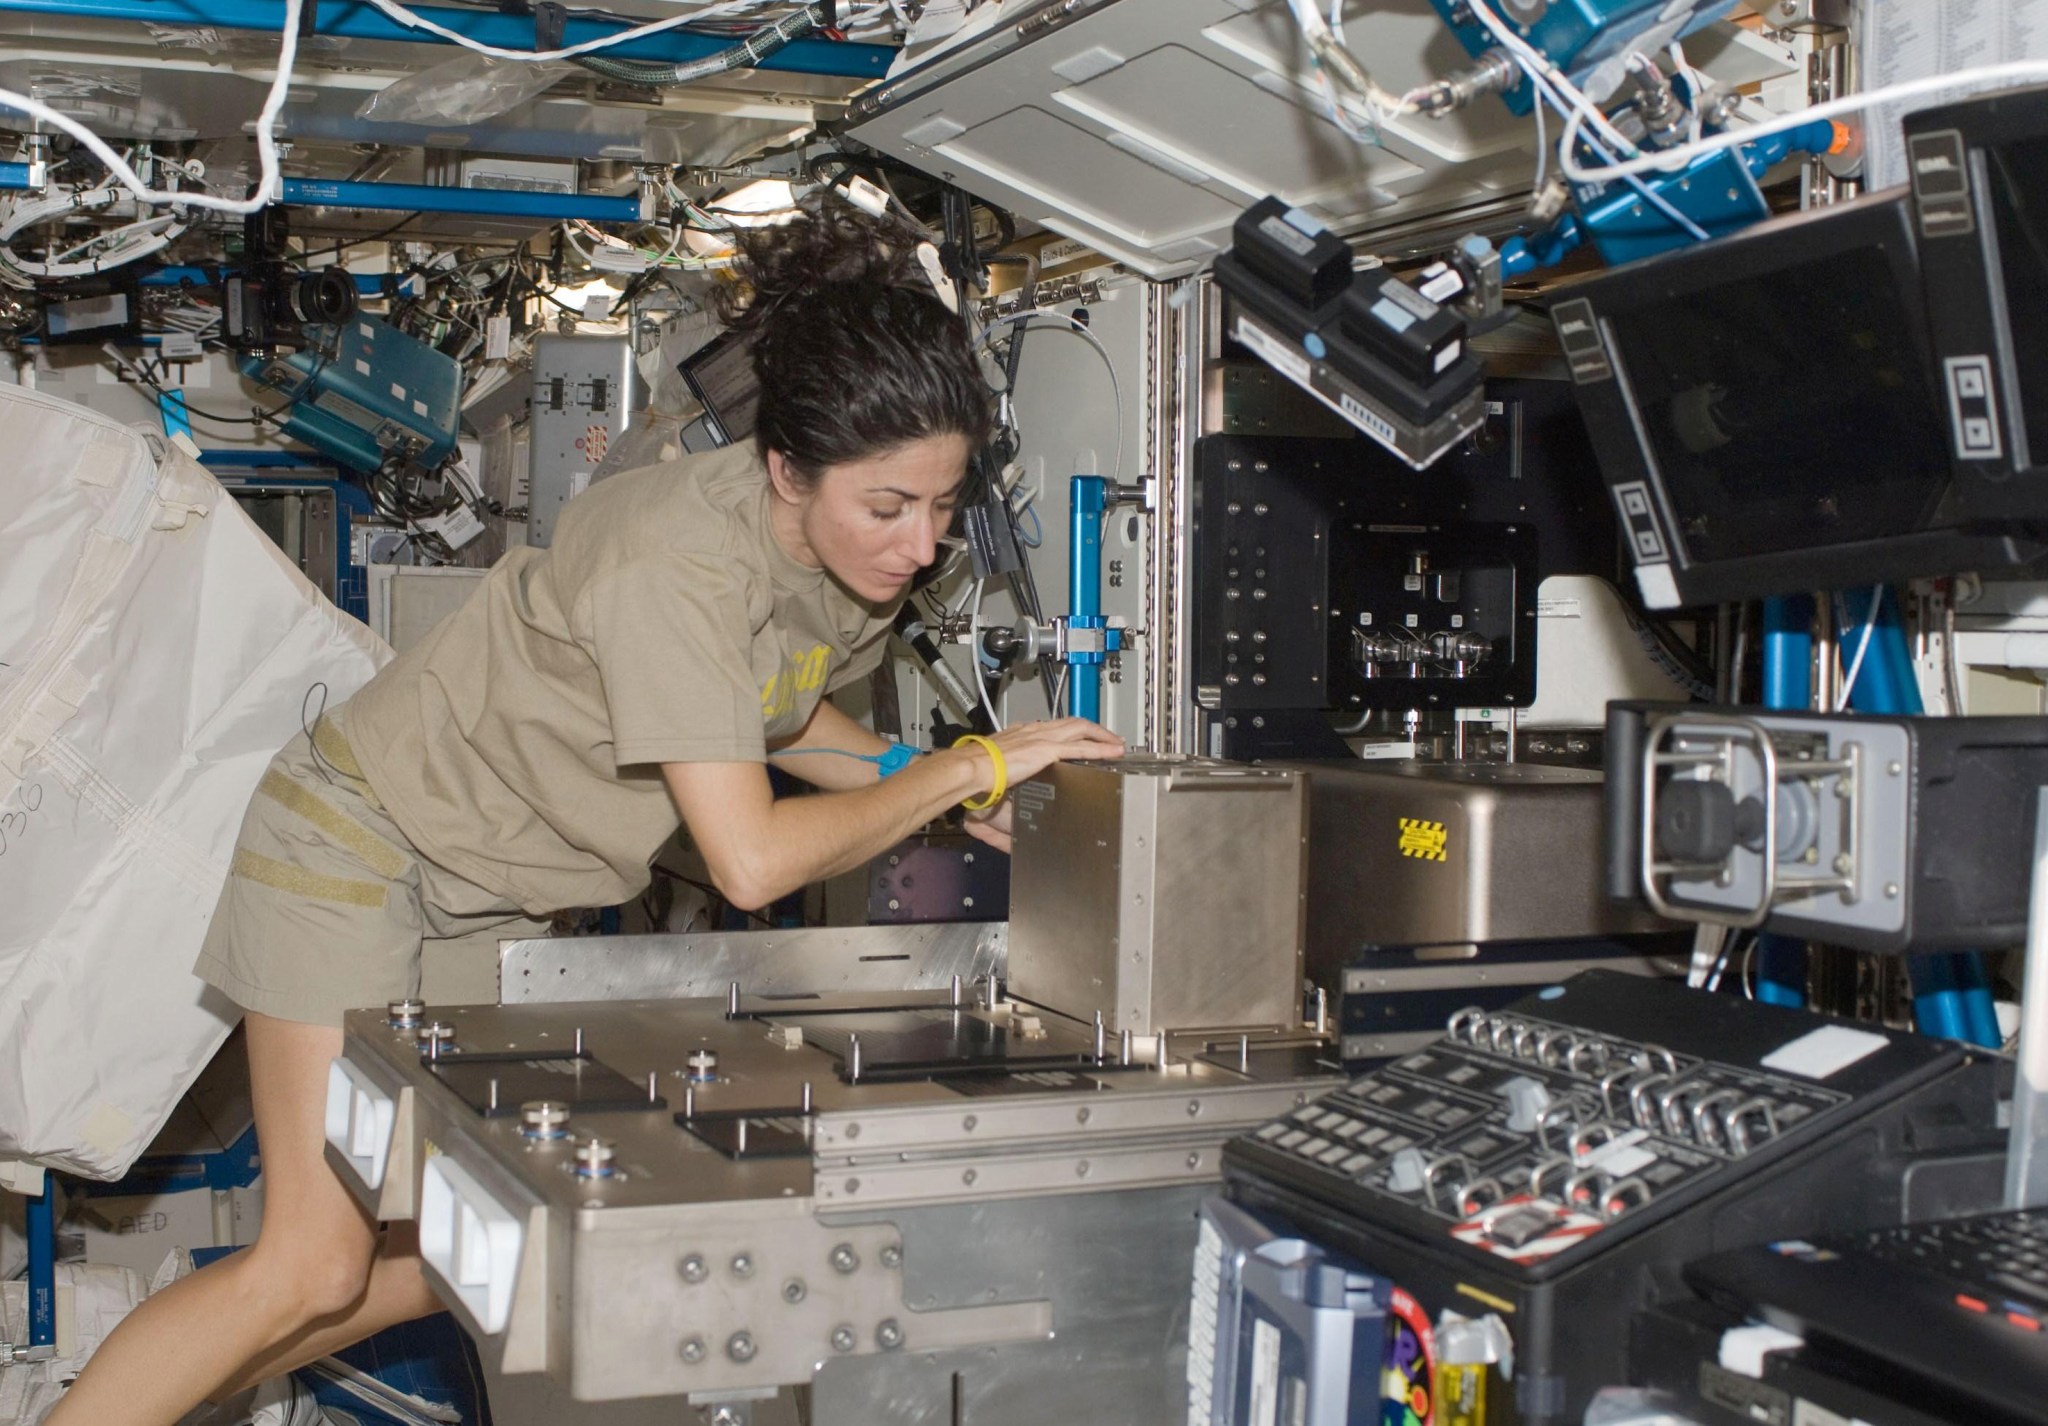 Woman working on equipment in space station.